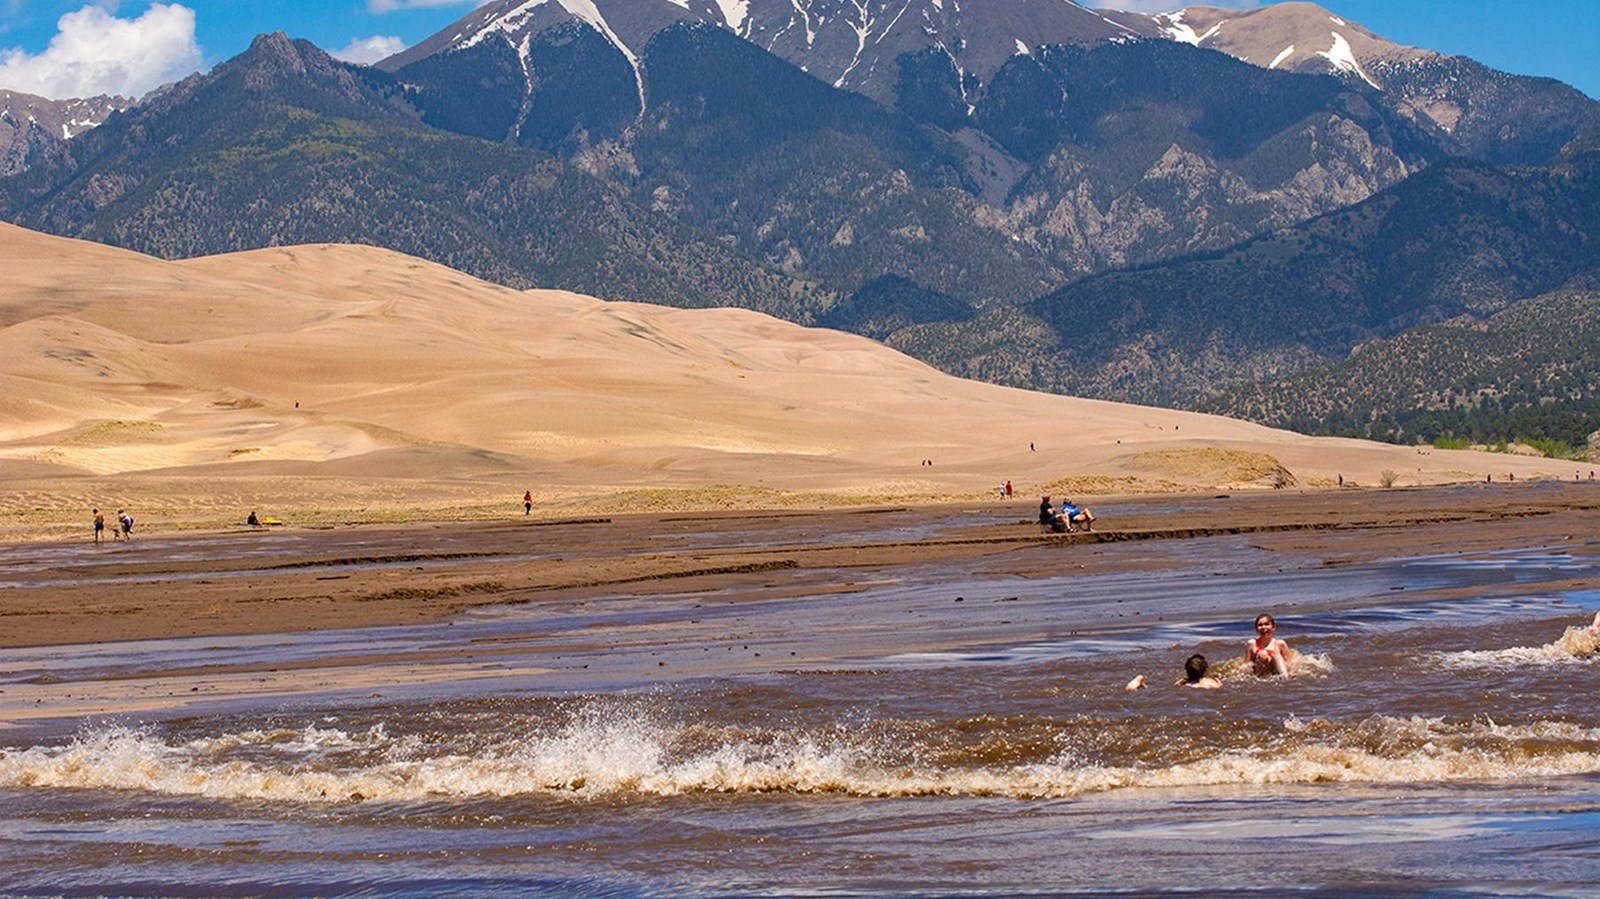 Children playing in a wave surging down a wide creek at the base of the dunes and mountains